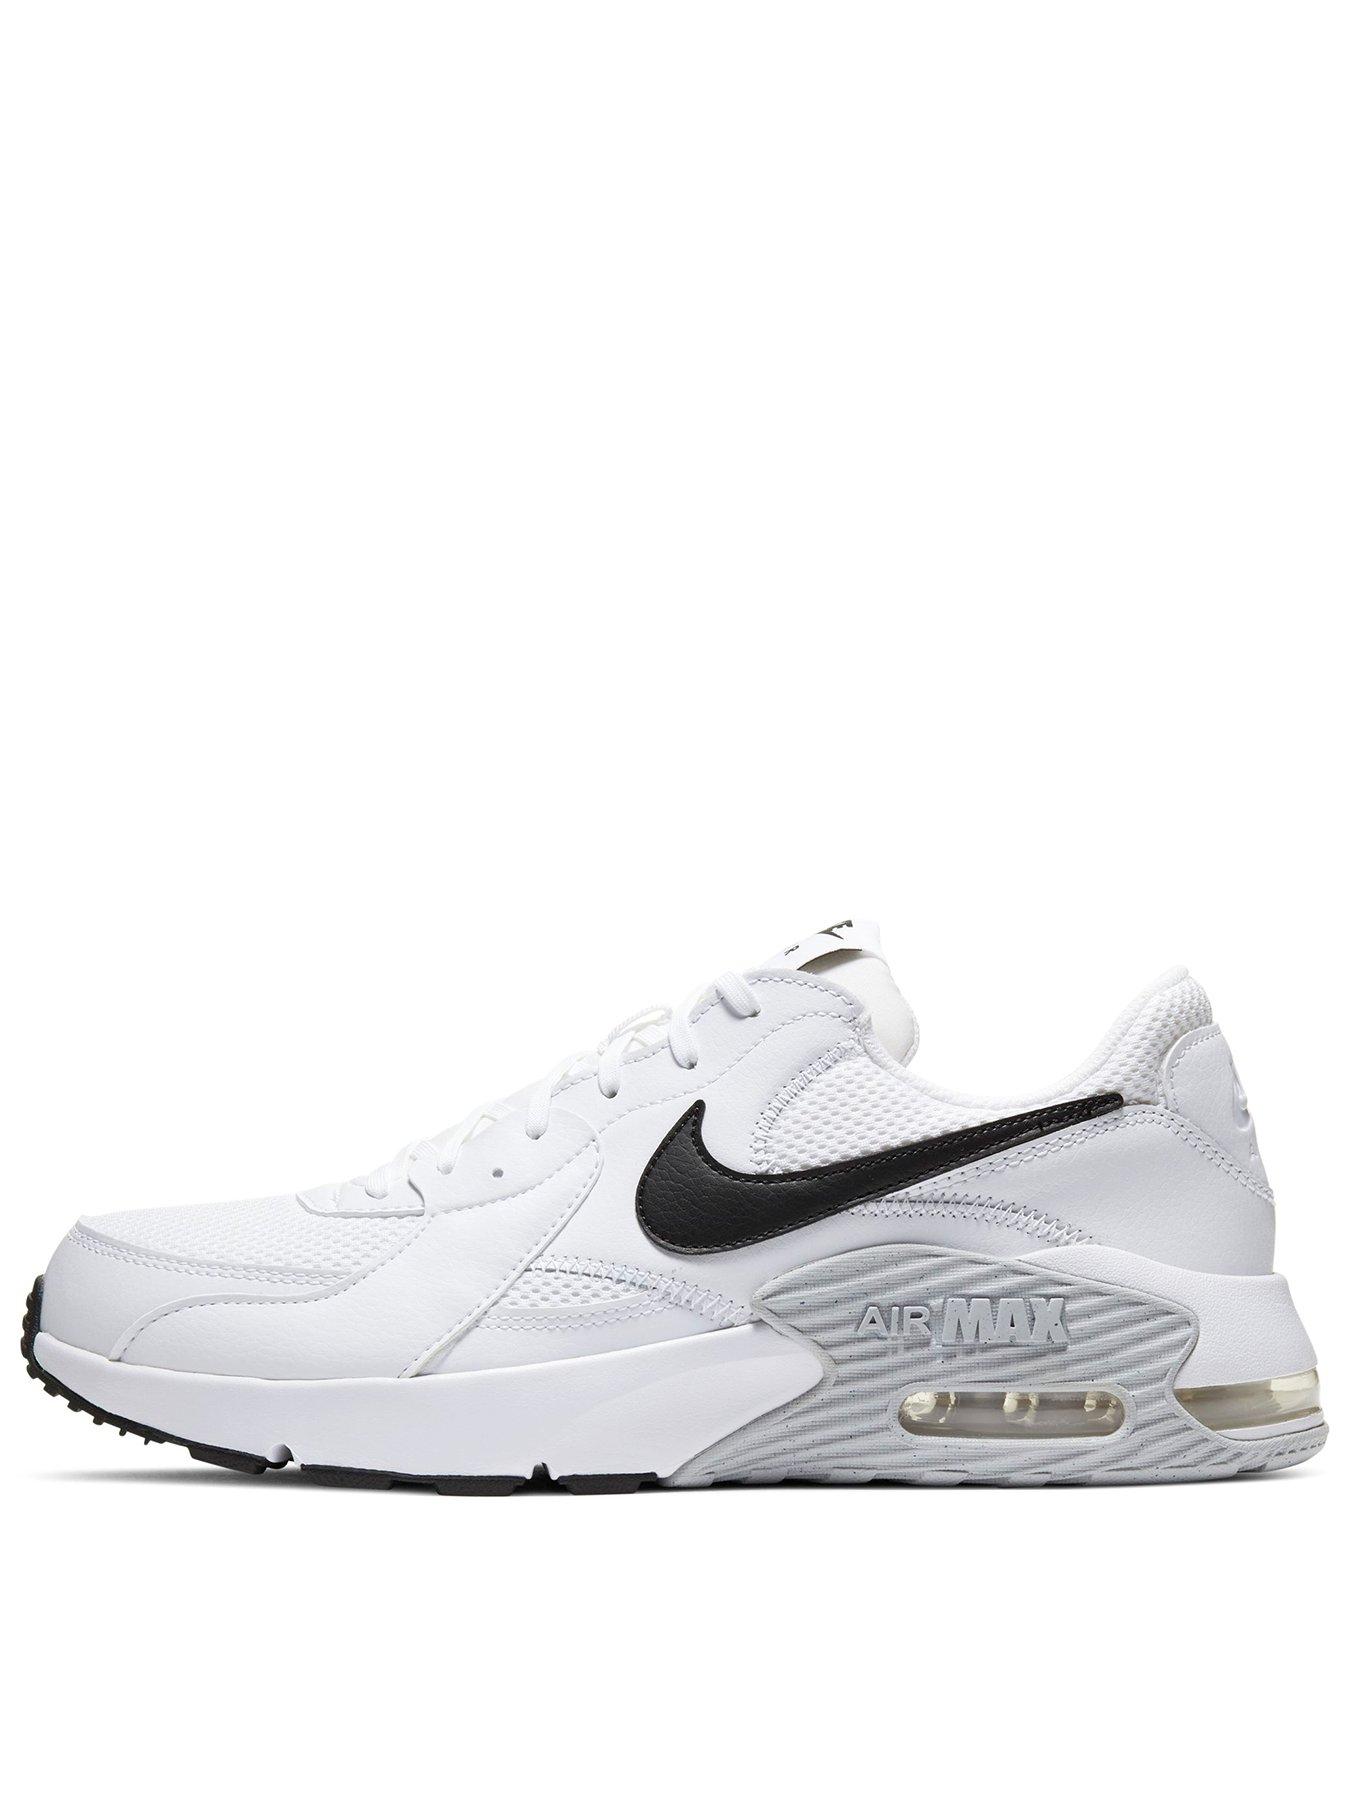 Nike Air Max Excee - White/Black | littlewoods.com